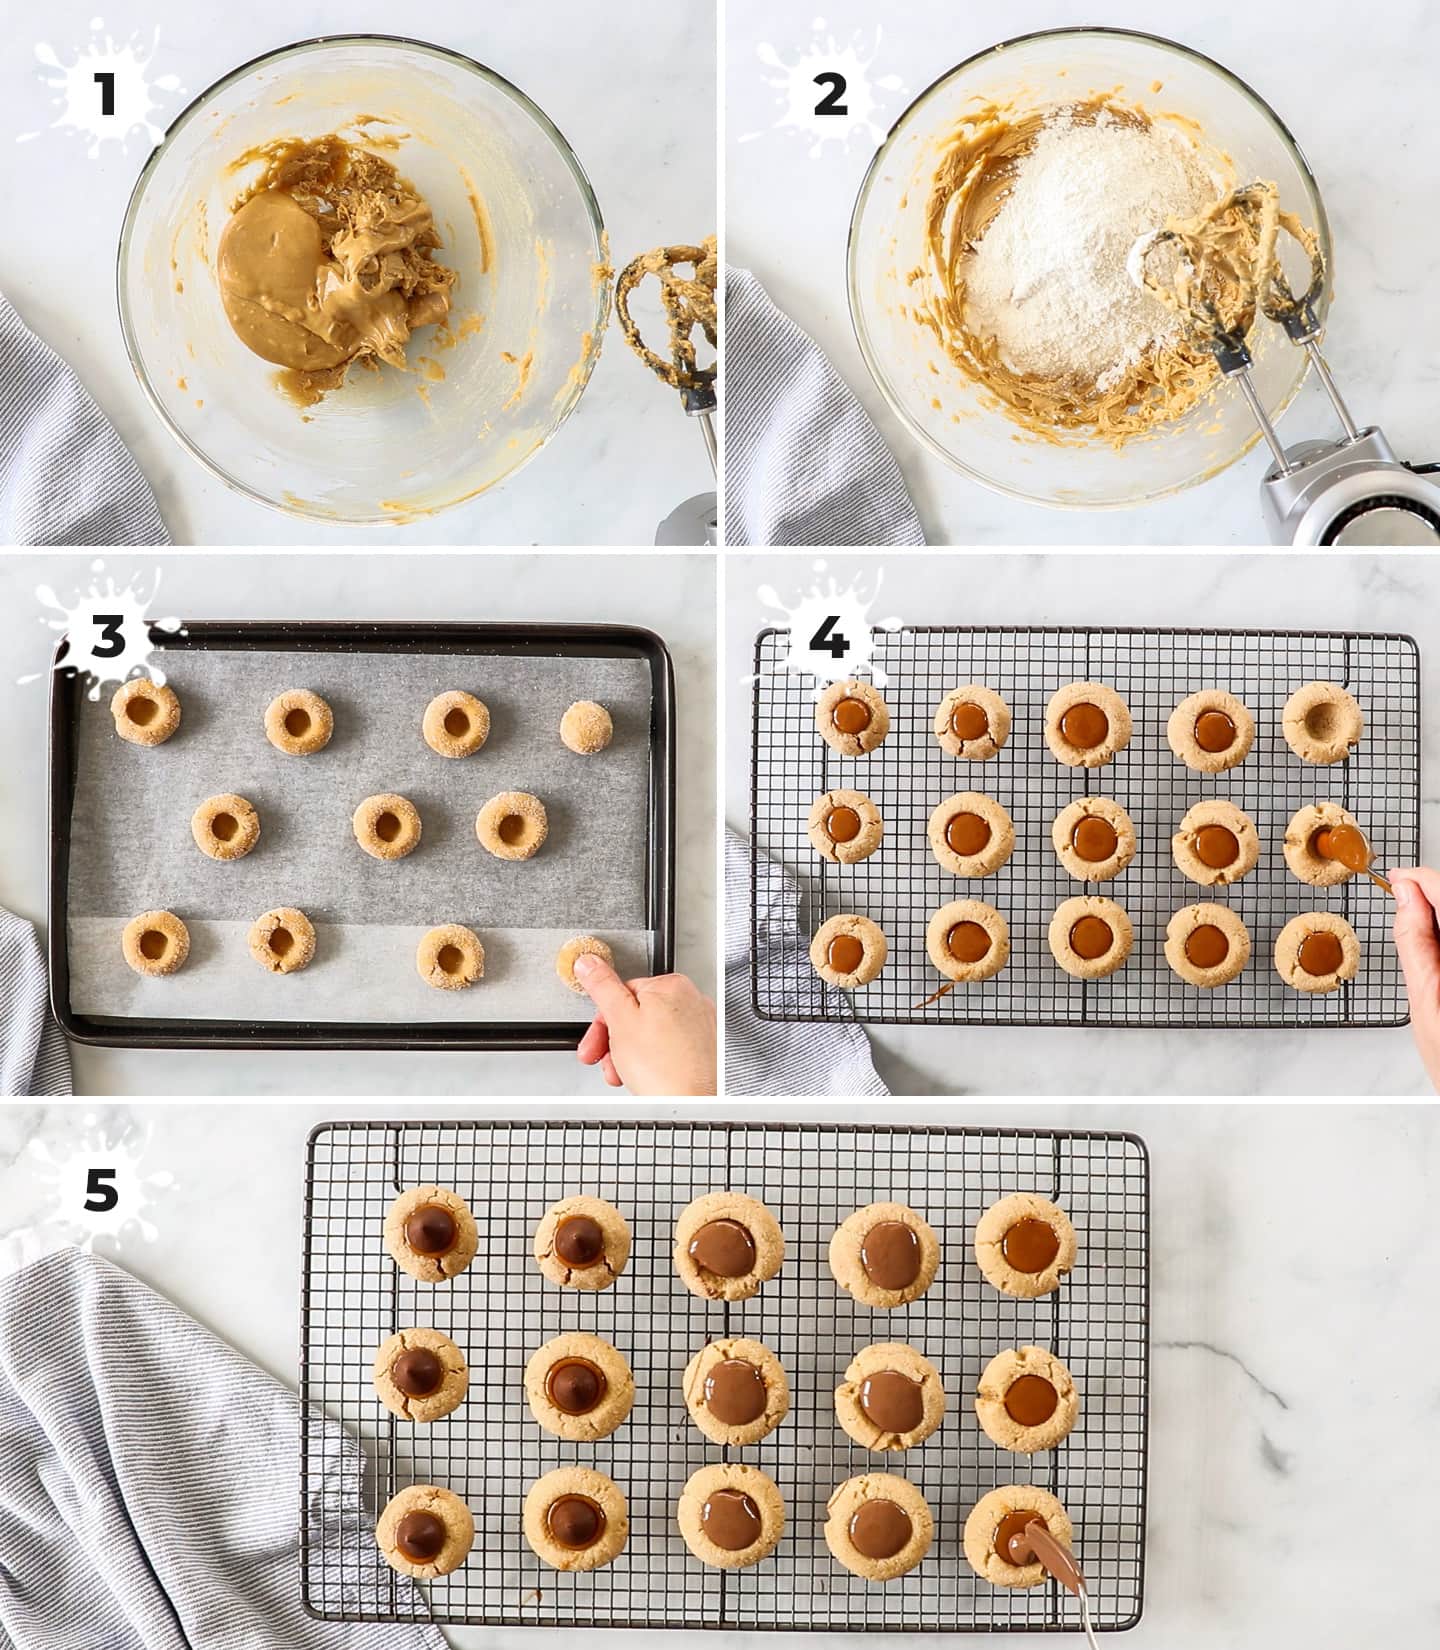 A collage of 5 images showing how to make caramel peanut butter thurmbprint cookies.